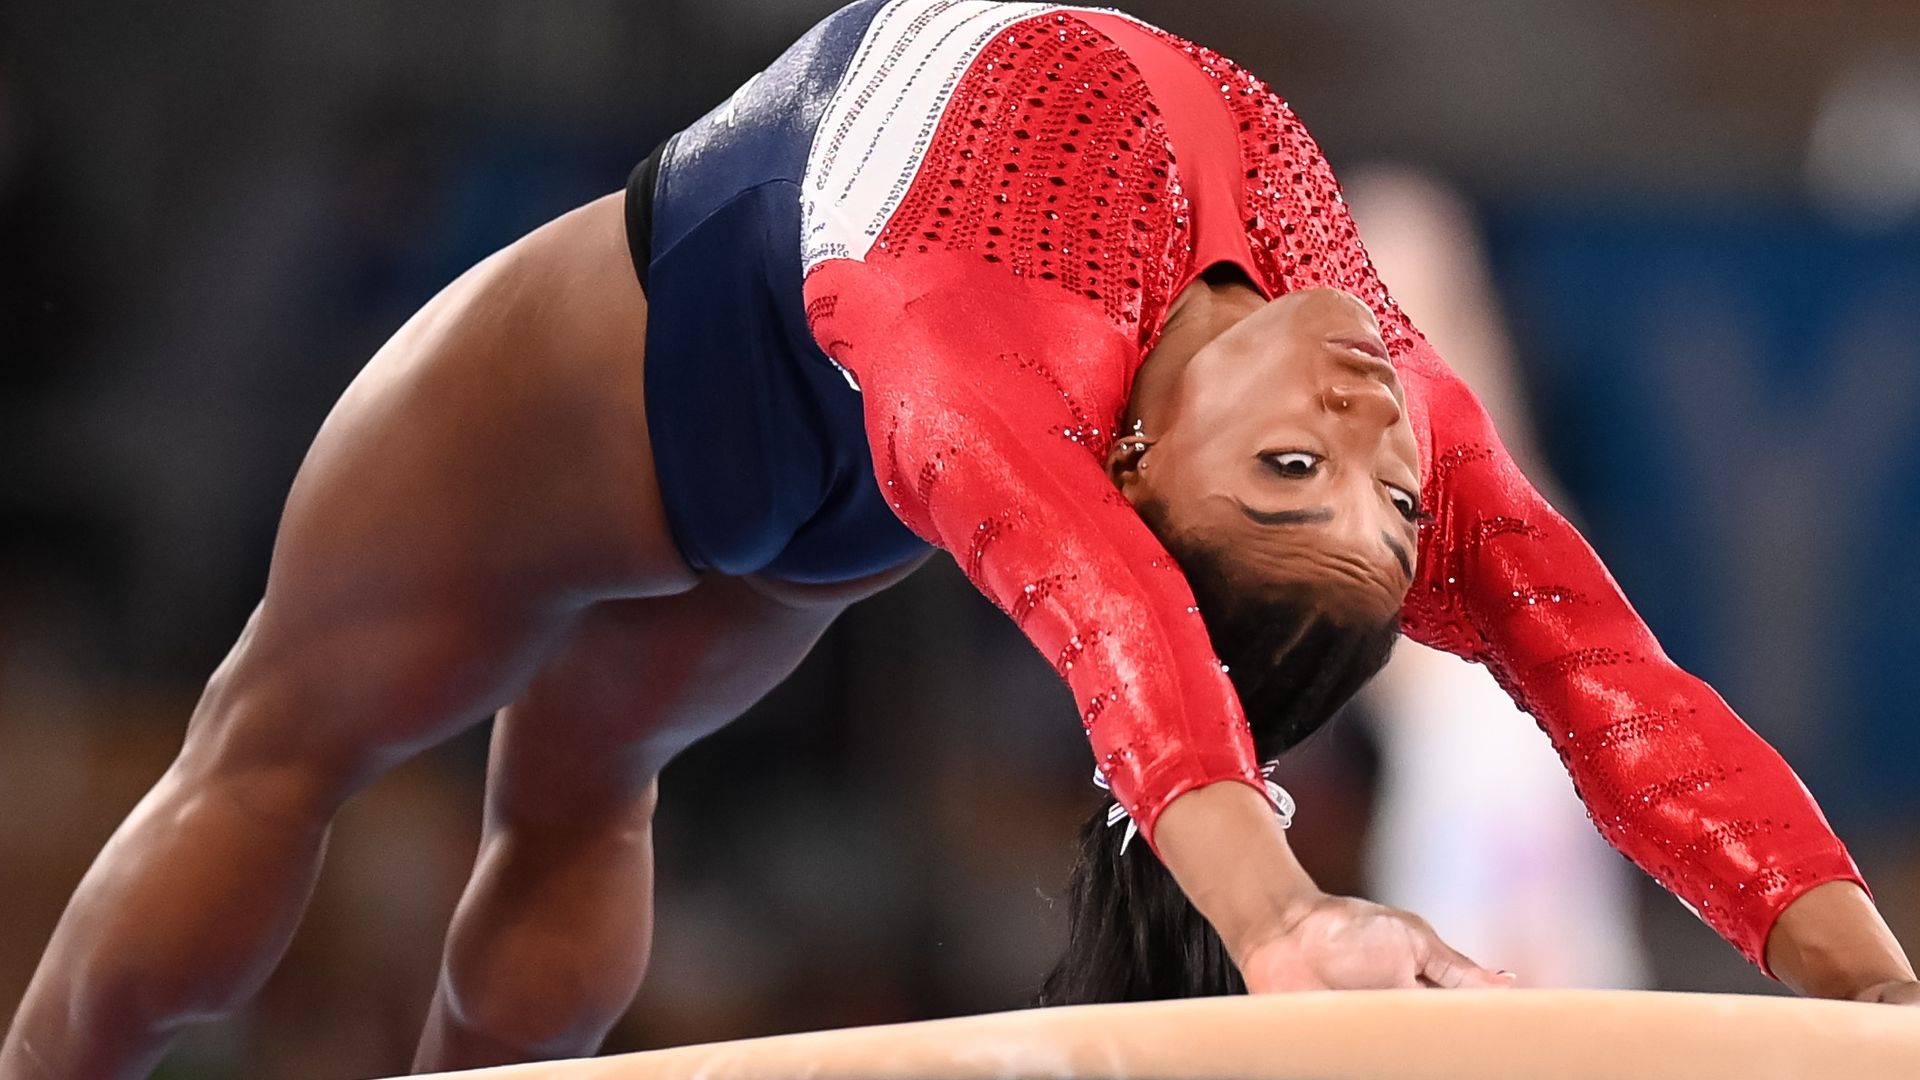 Despite the massive success of Simone Biles and her teammates, USA Gymnastics is failing to adequately support its athletes.